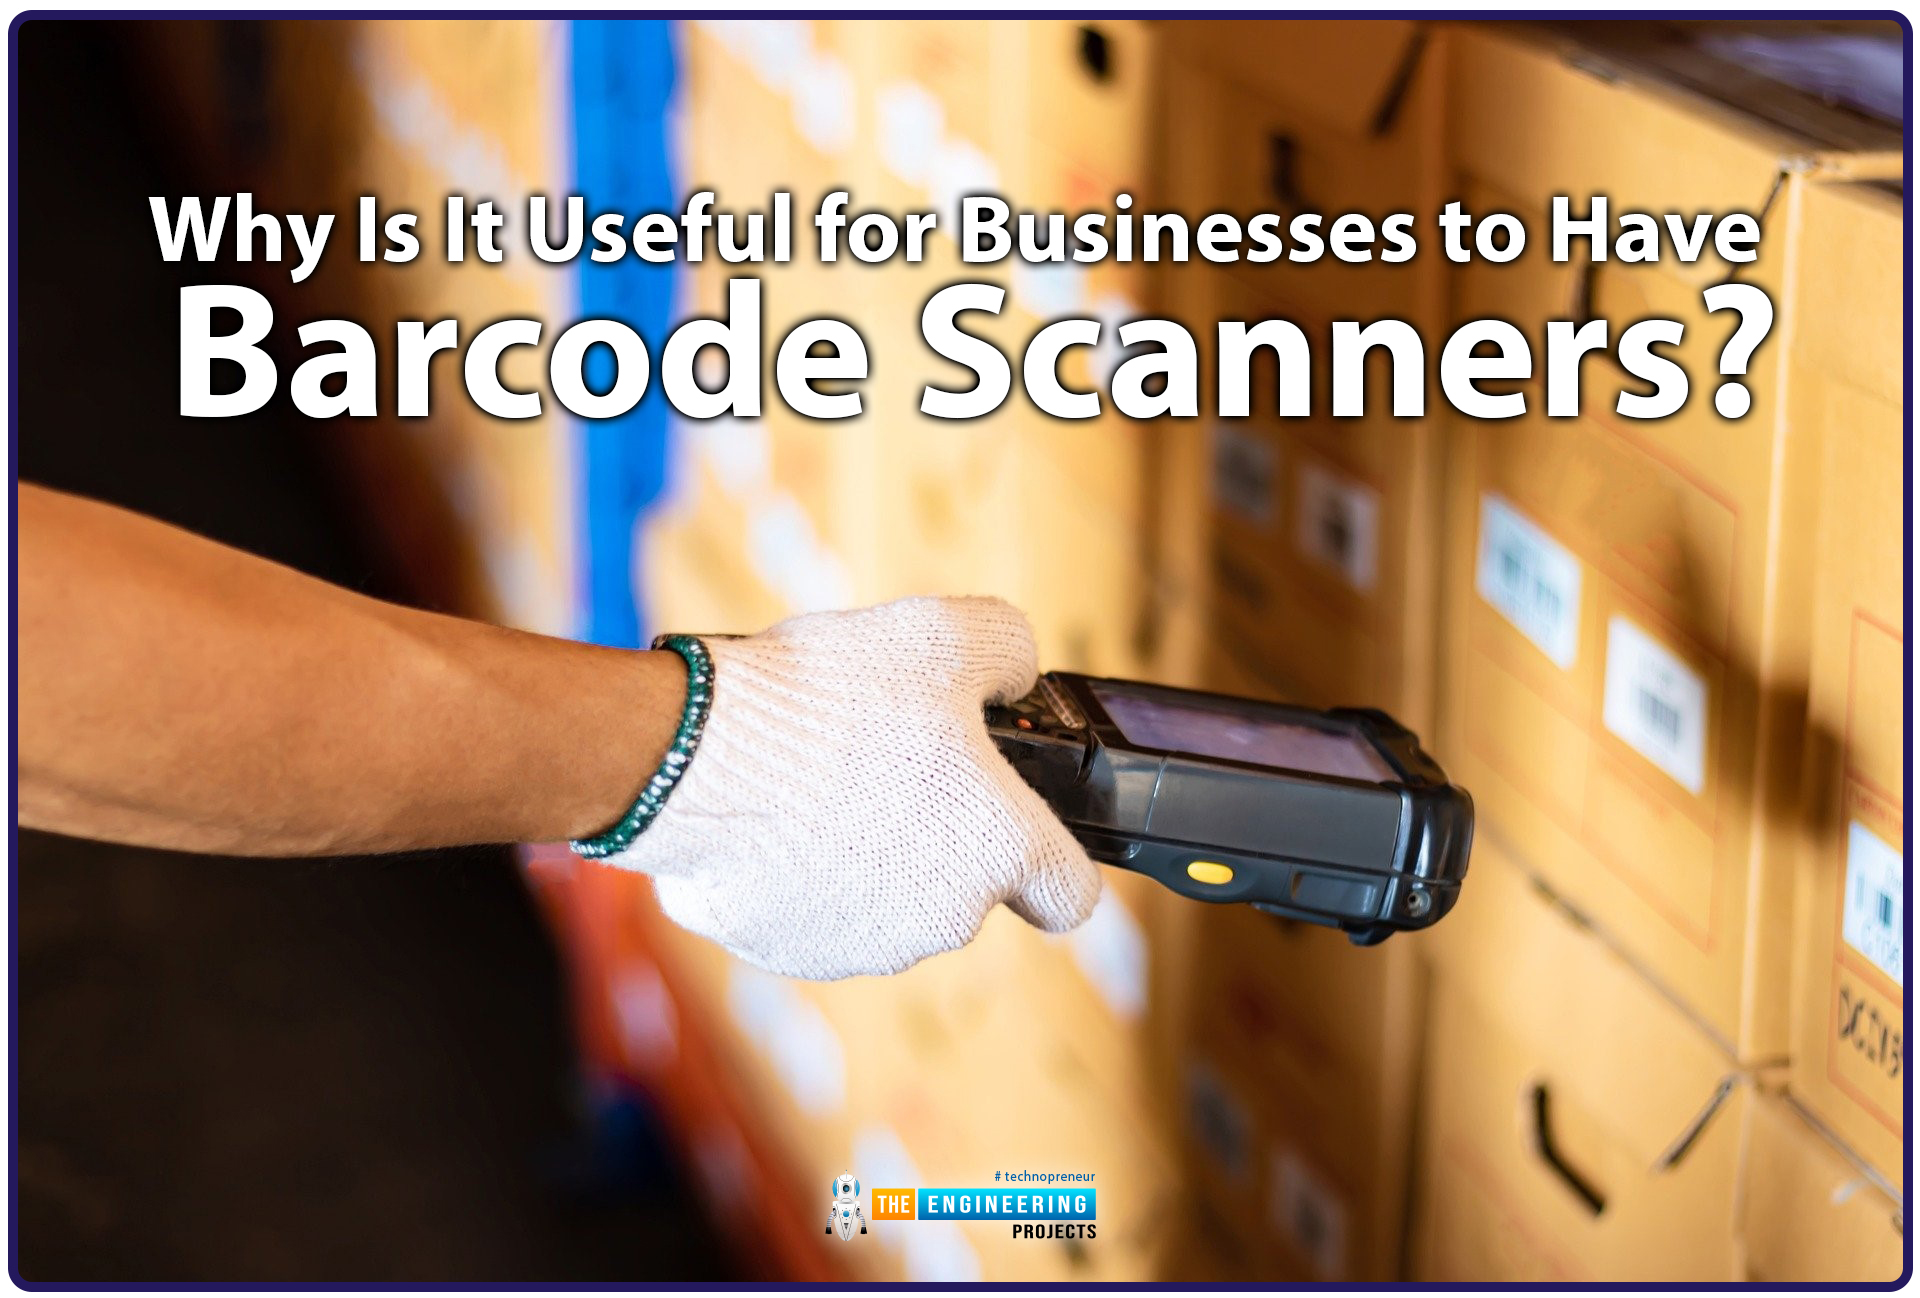 How to Interface USB Barcode Scanner with Raspberry Pi 4, USB Barcode Scanner with Raspberry Pi 4, barcode reader with RPi4, Rpi4 barcode reader, usb barcode reader RPi4